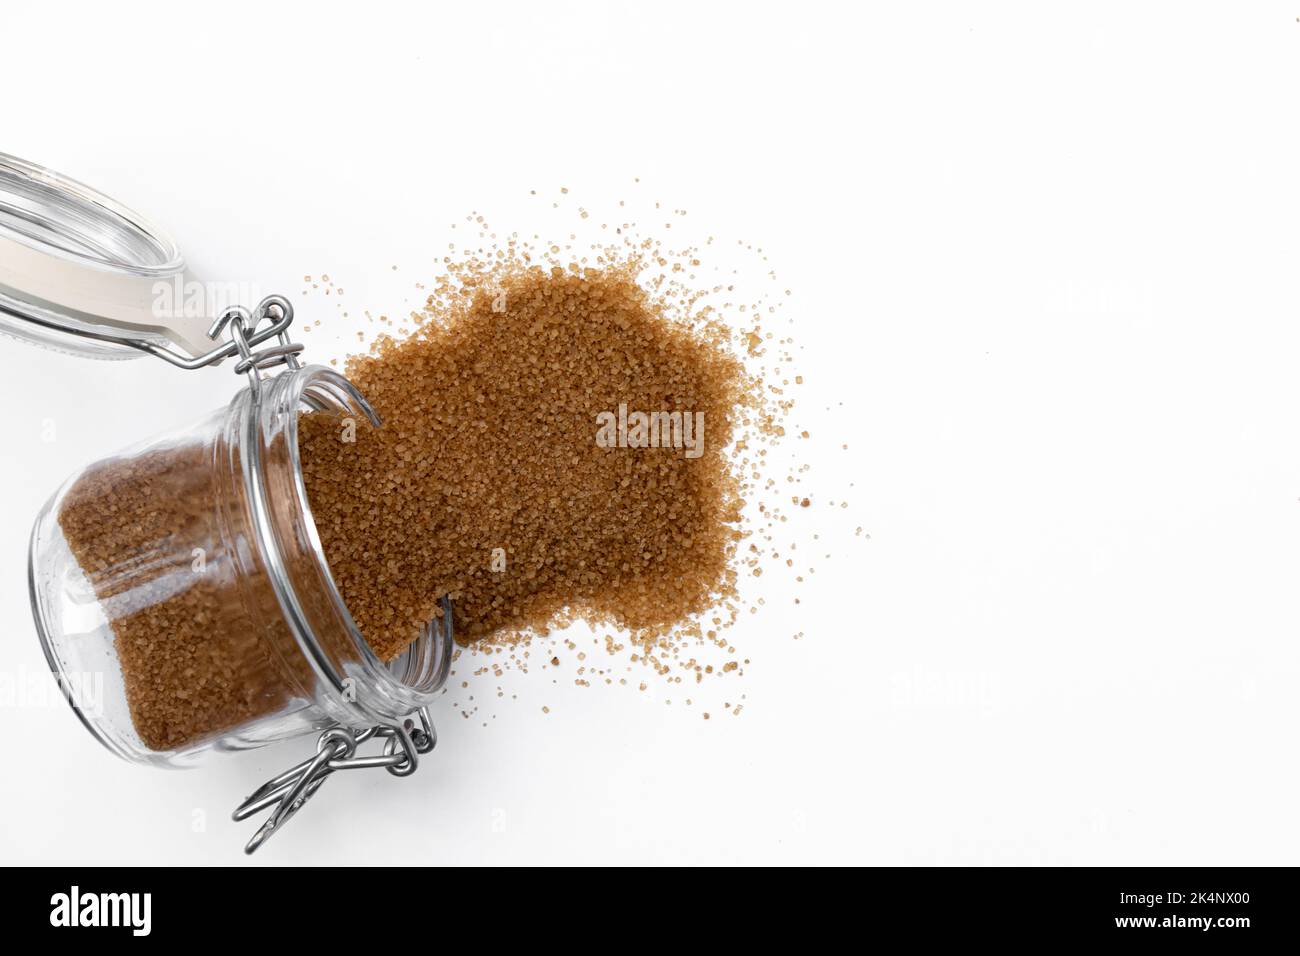 cane sugar in glass jar isolated on white background, natural product used in cooking and cosmetics, macro photo of seasoning, close up, heap of unref Stock Photo